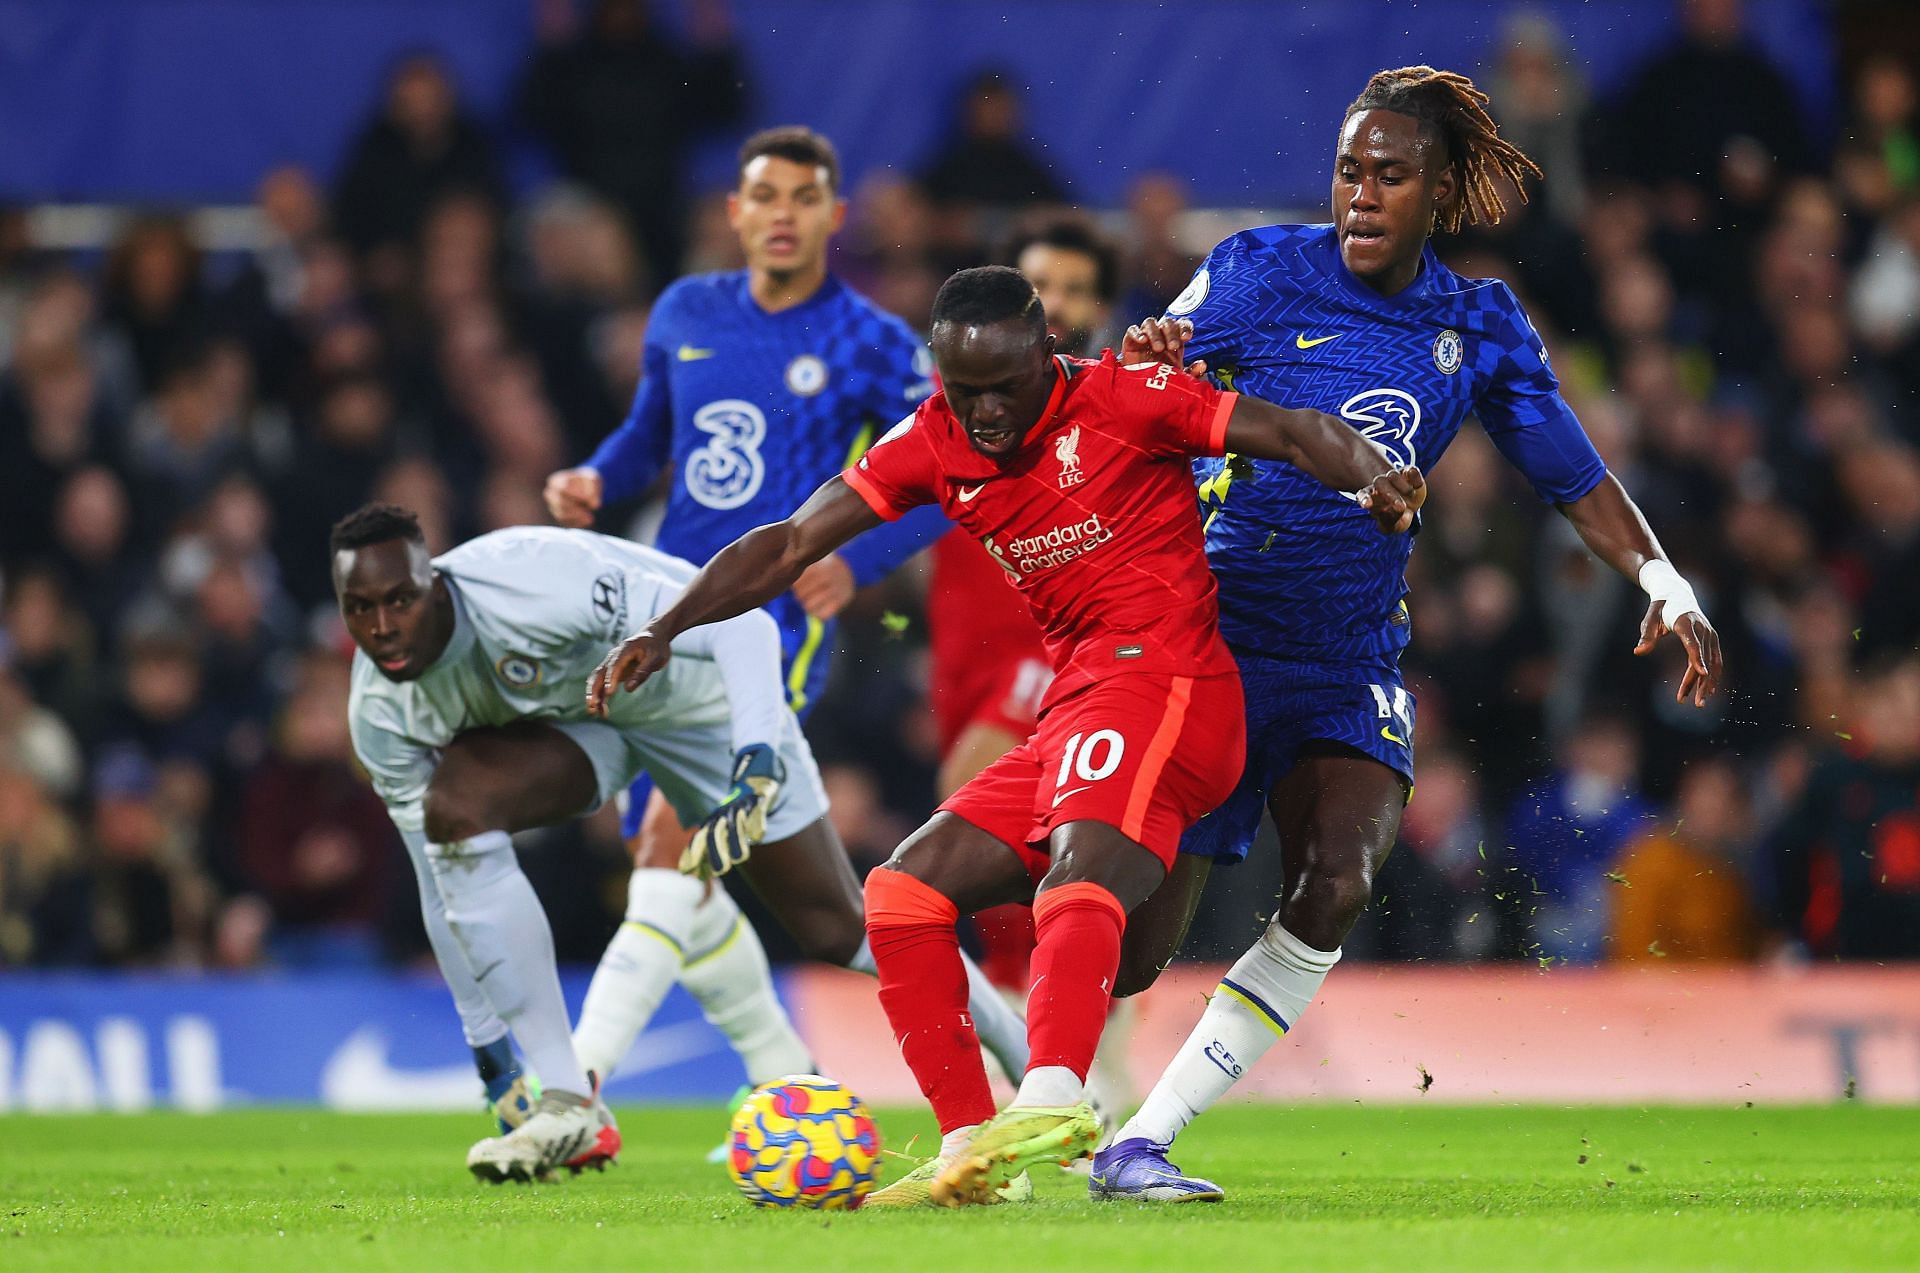 Liverpool squandered a 2-0 lead at Stamford Bridge,